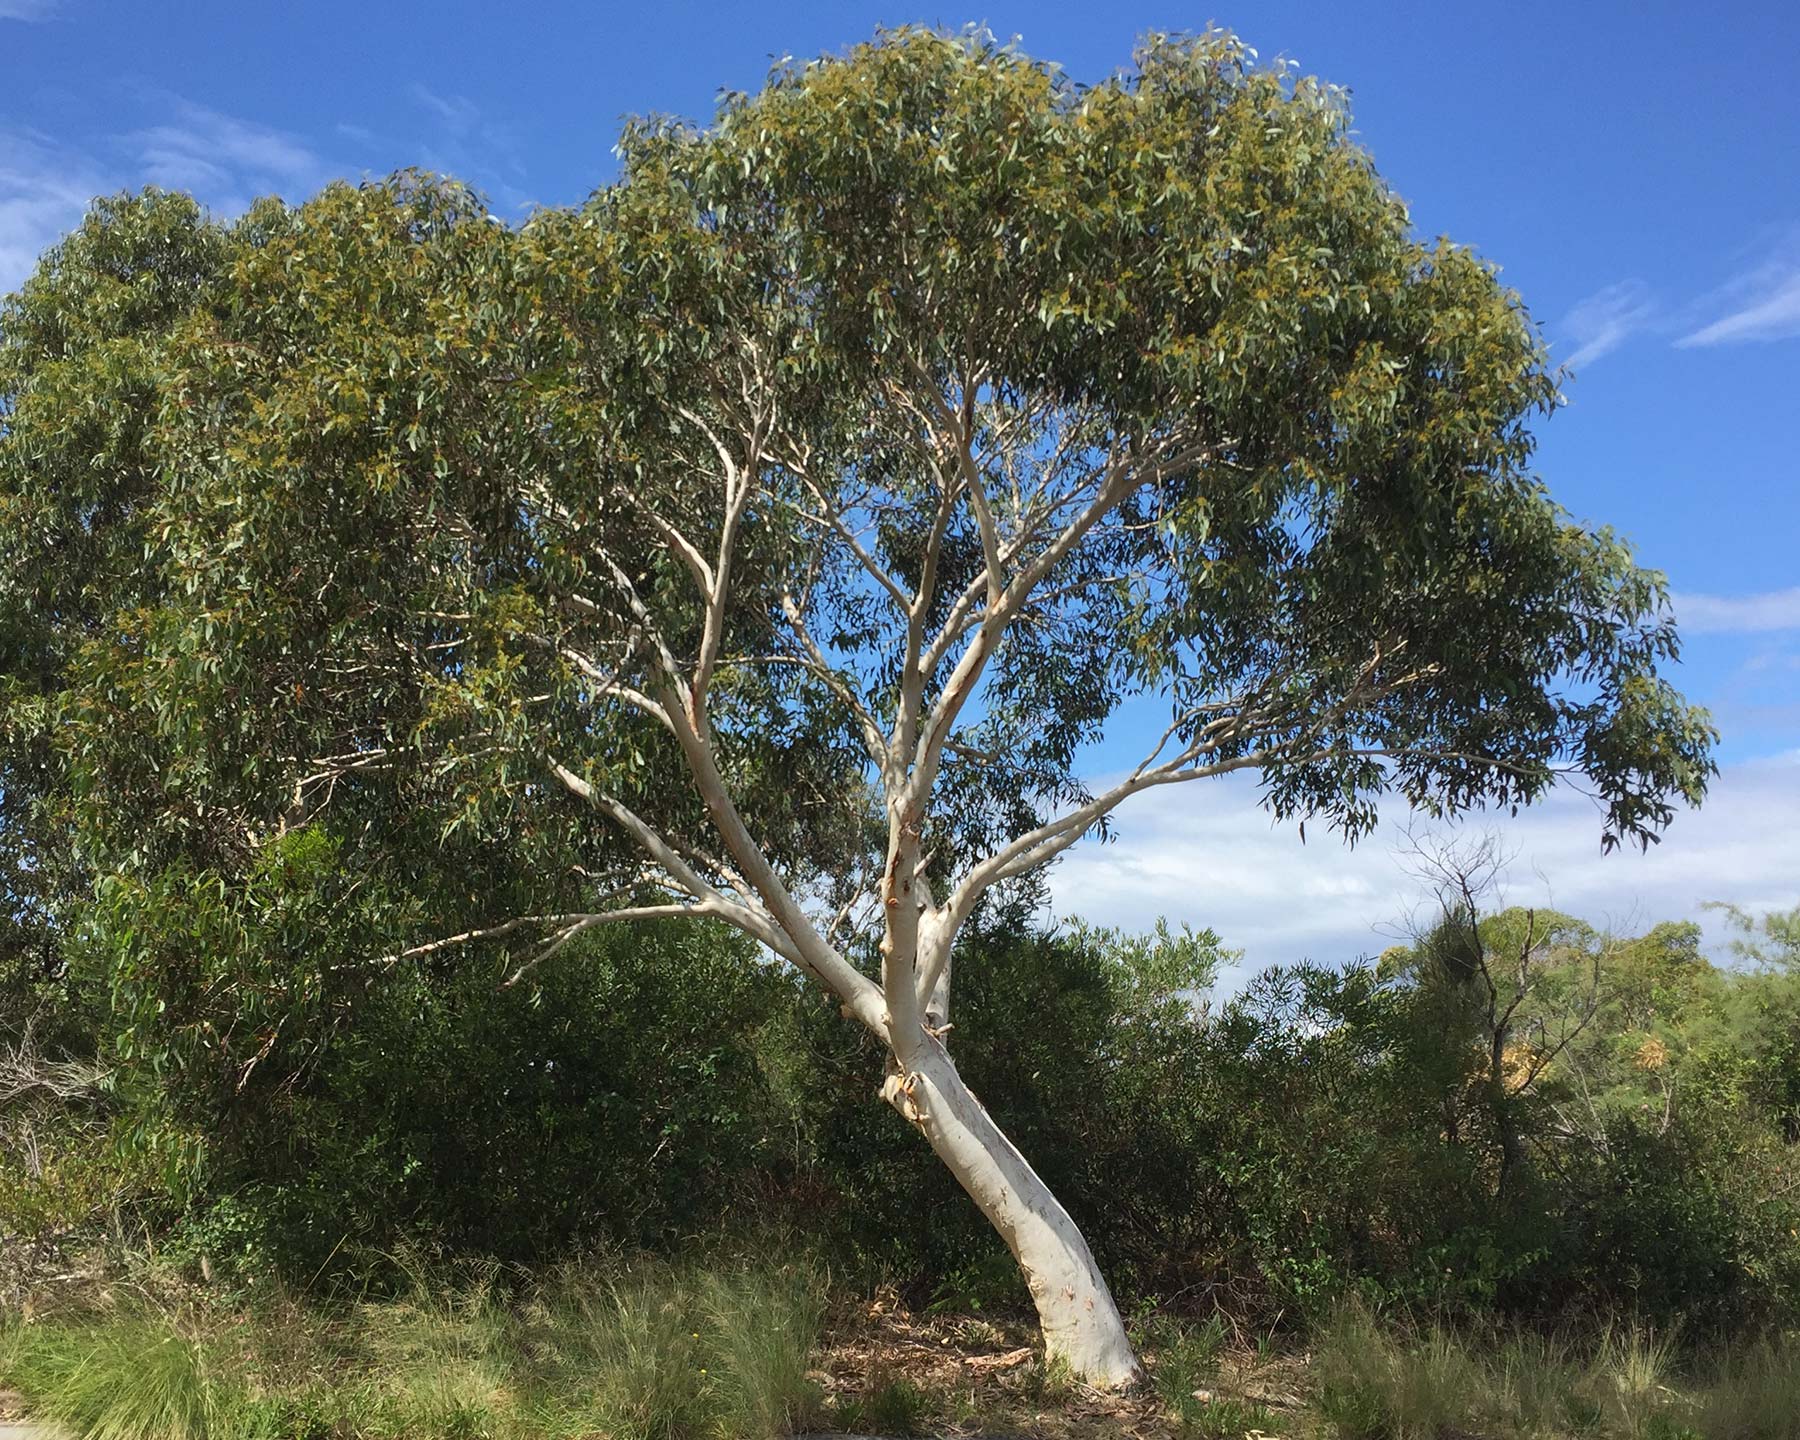 Eucalyptus haemastoma Scribbly Gum - Smooth is a beautiful Gum Tree with smooth white bark